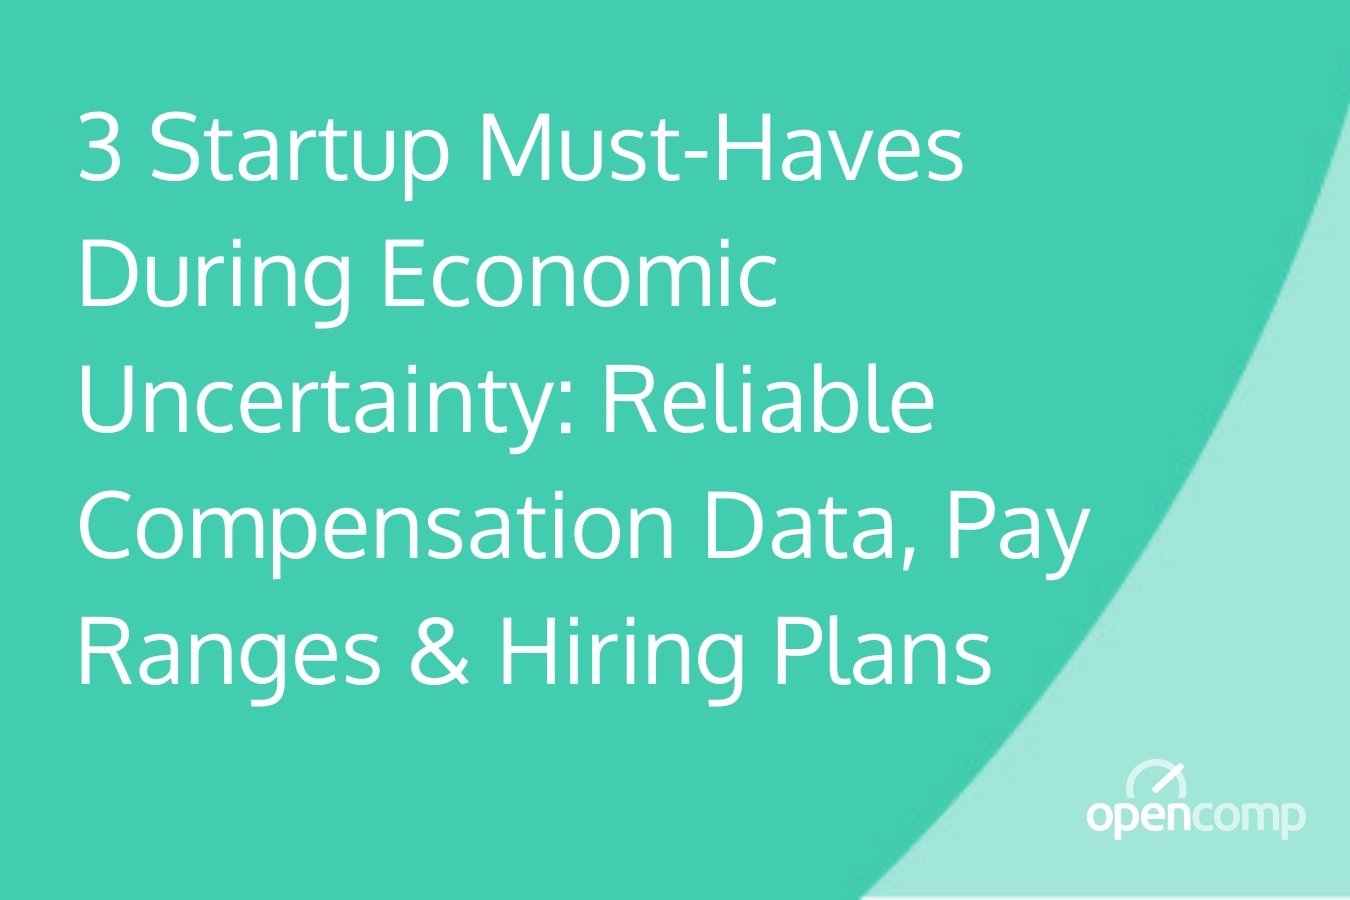 3 Startup Must-Haves During Economic Uncertainty_ Reliable Compensation Data, Pay Ranges & Hiring Plans